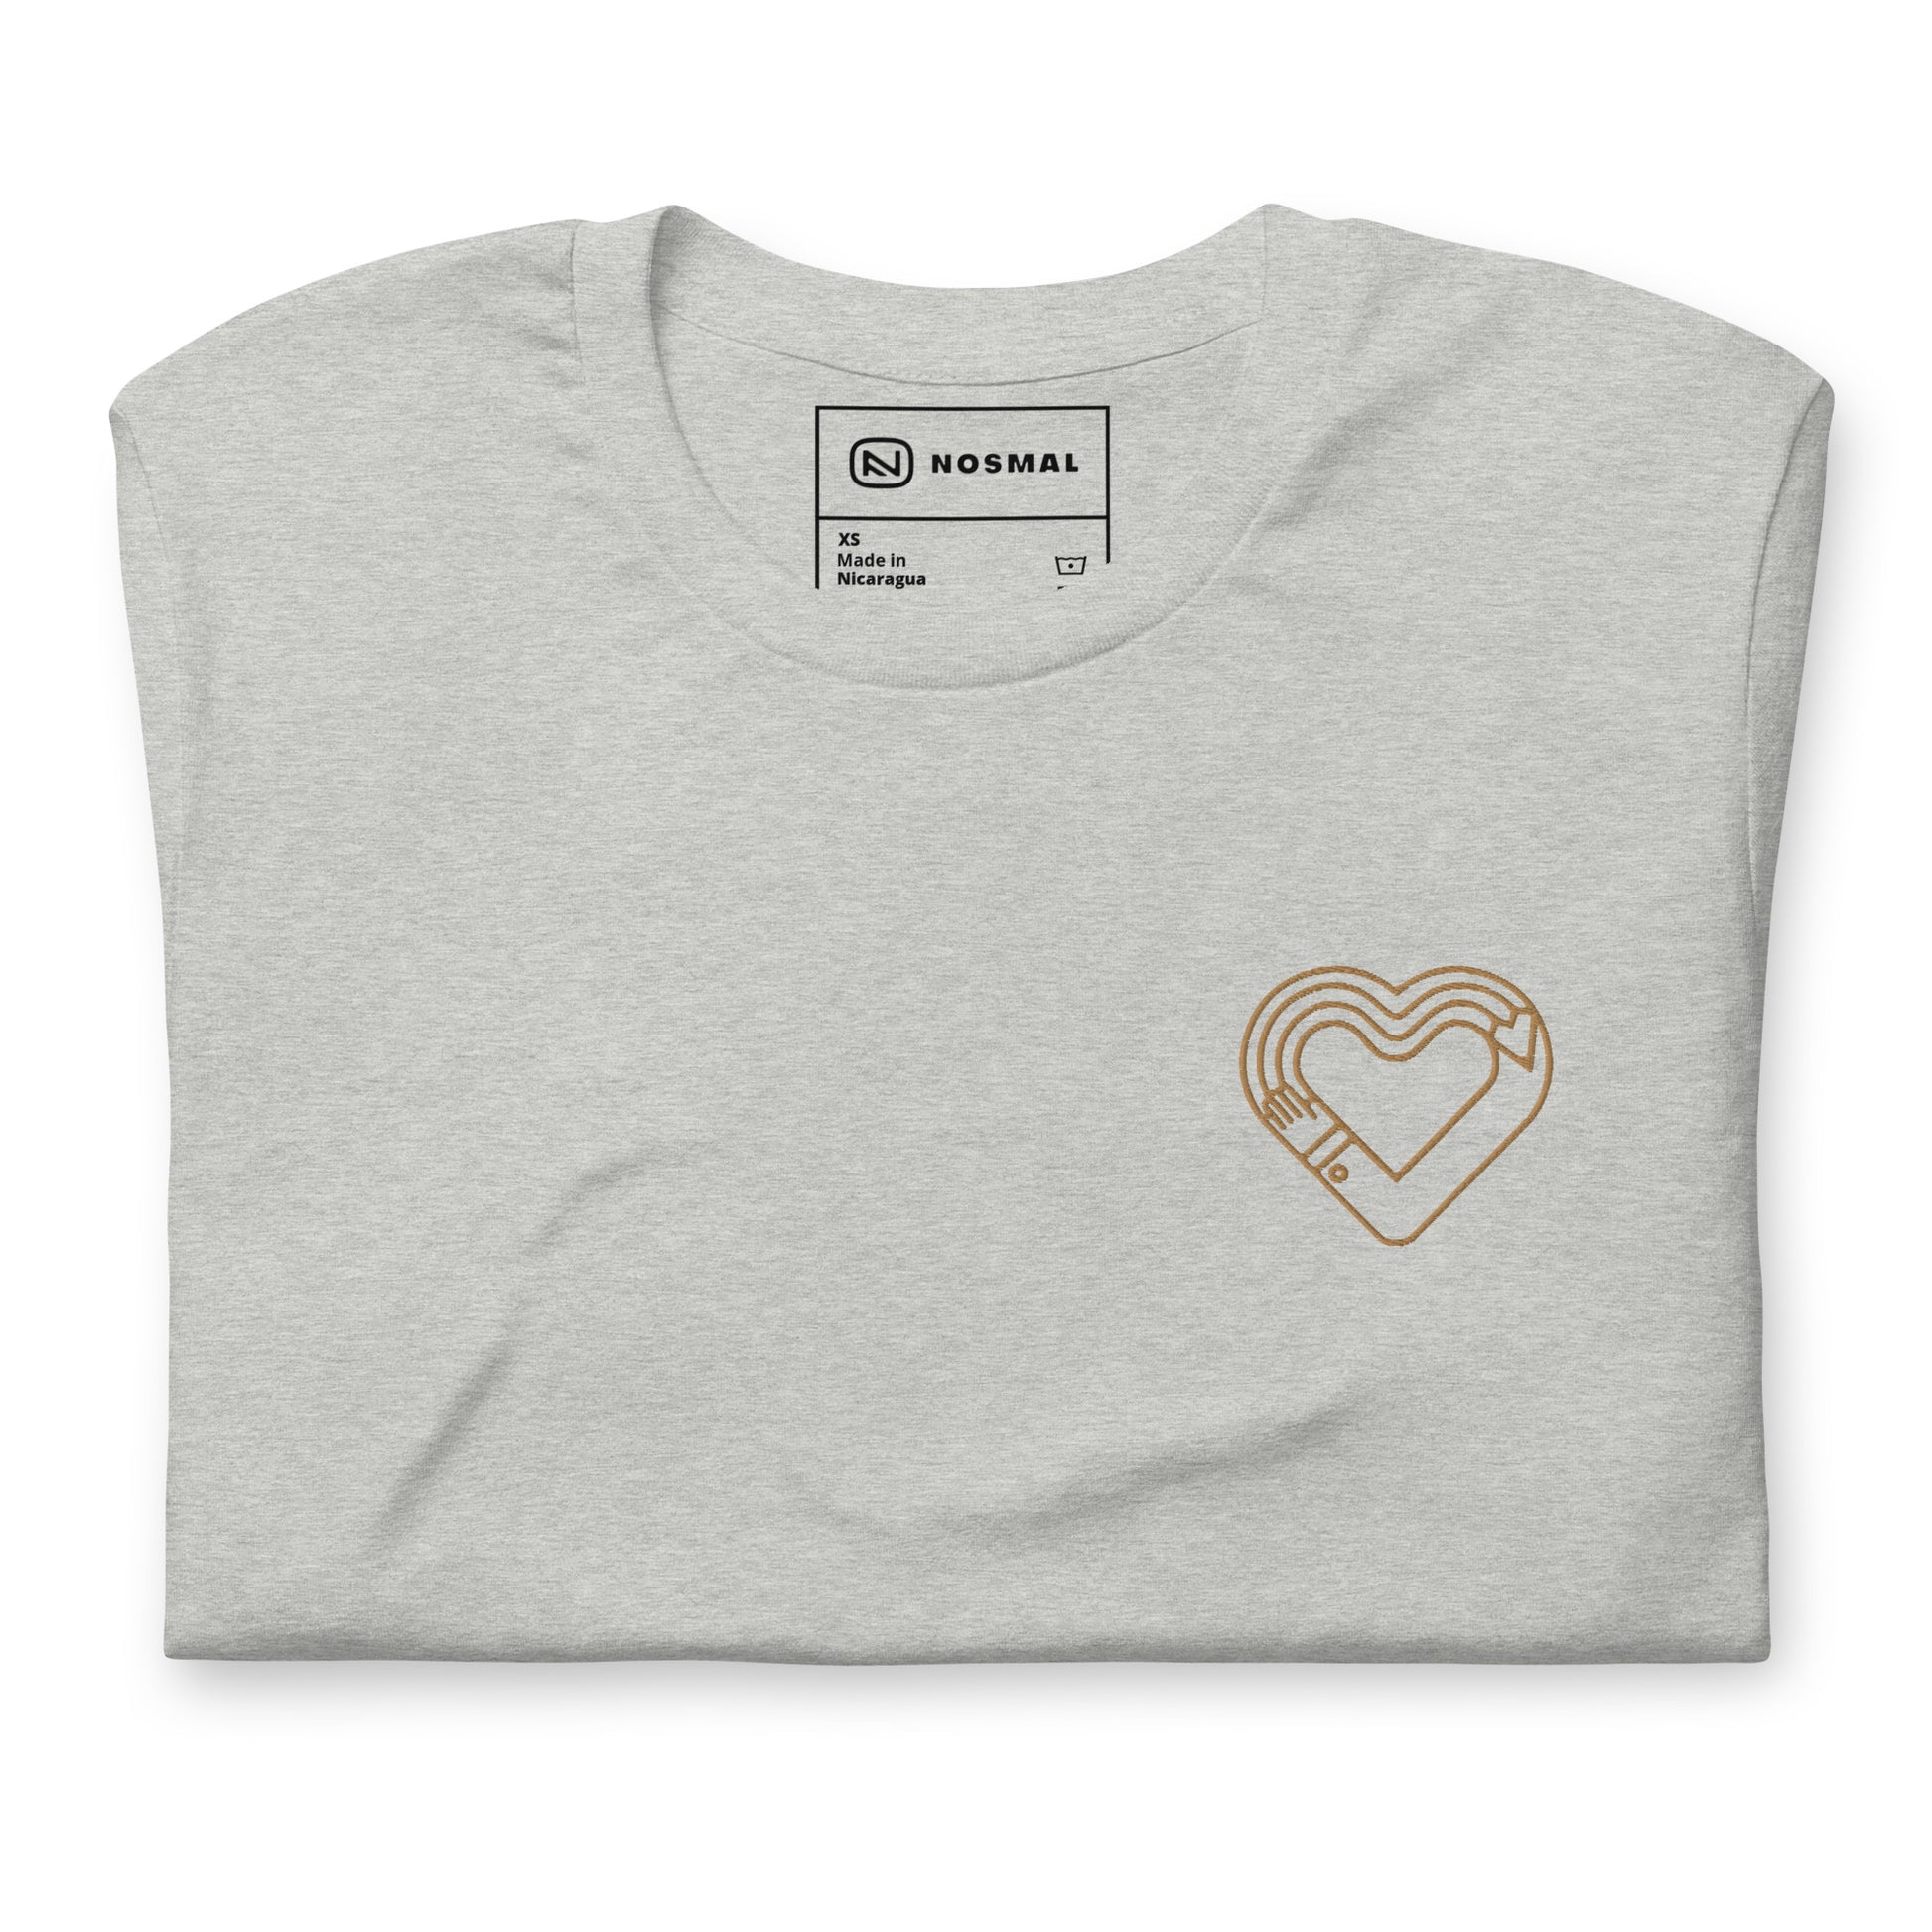 Top down view of maker's heart II gold embroidered design on heather athletic grey unisex t-shirt.